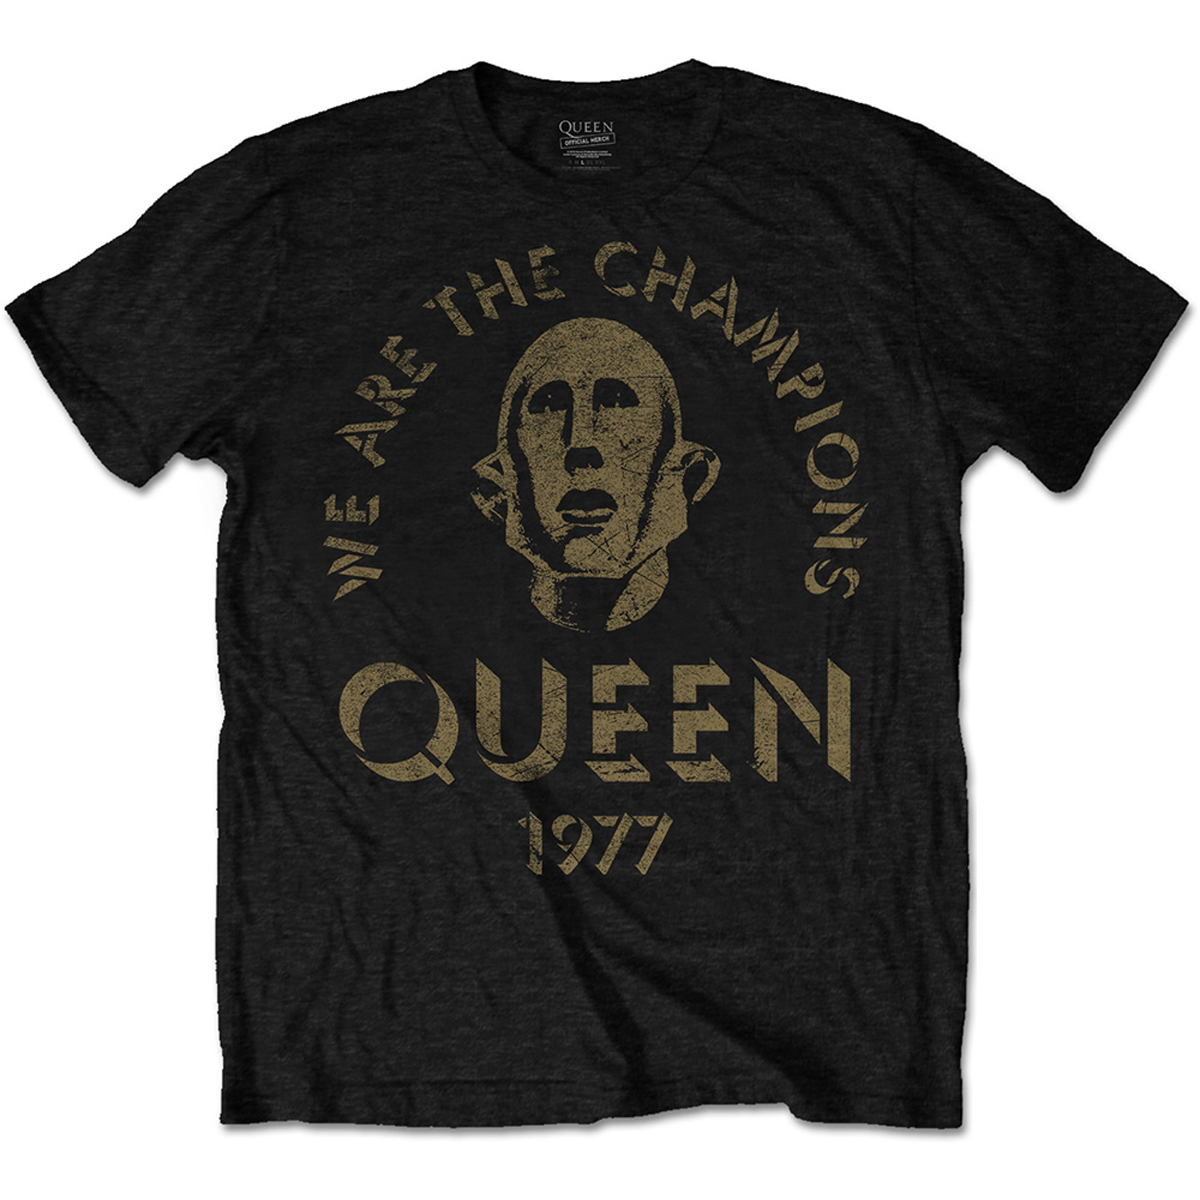 we are the champions tee